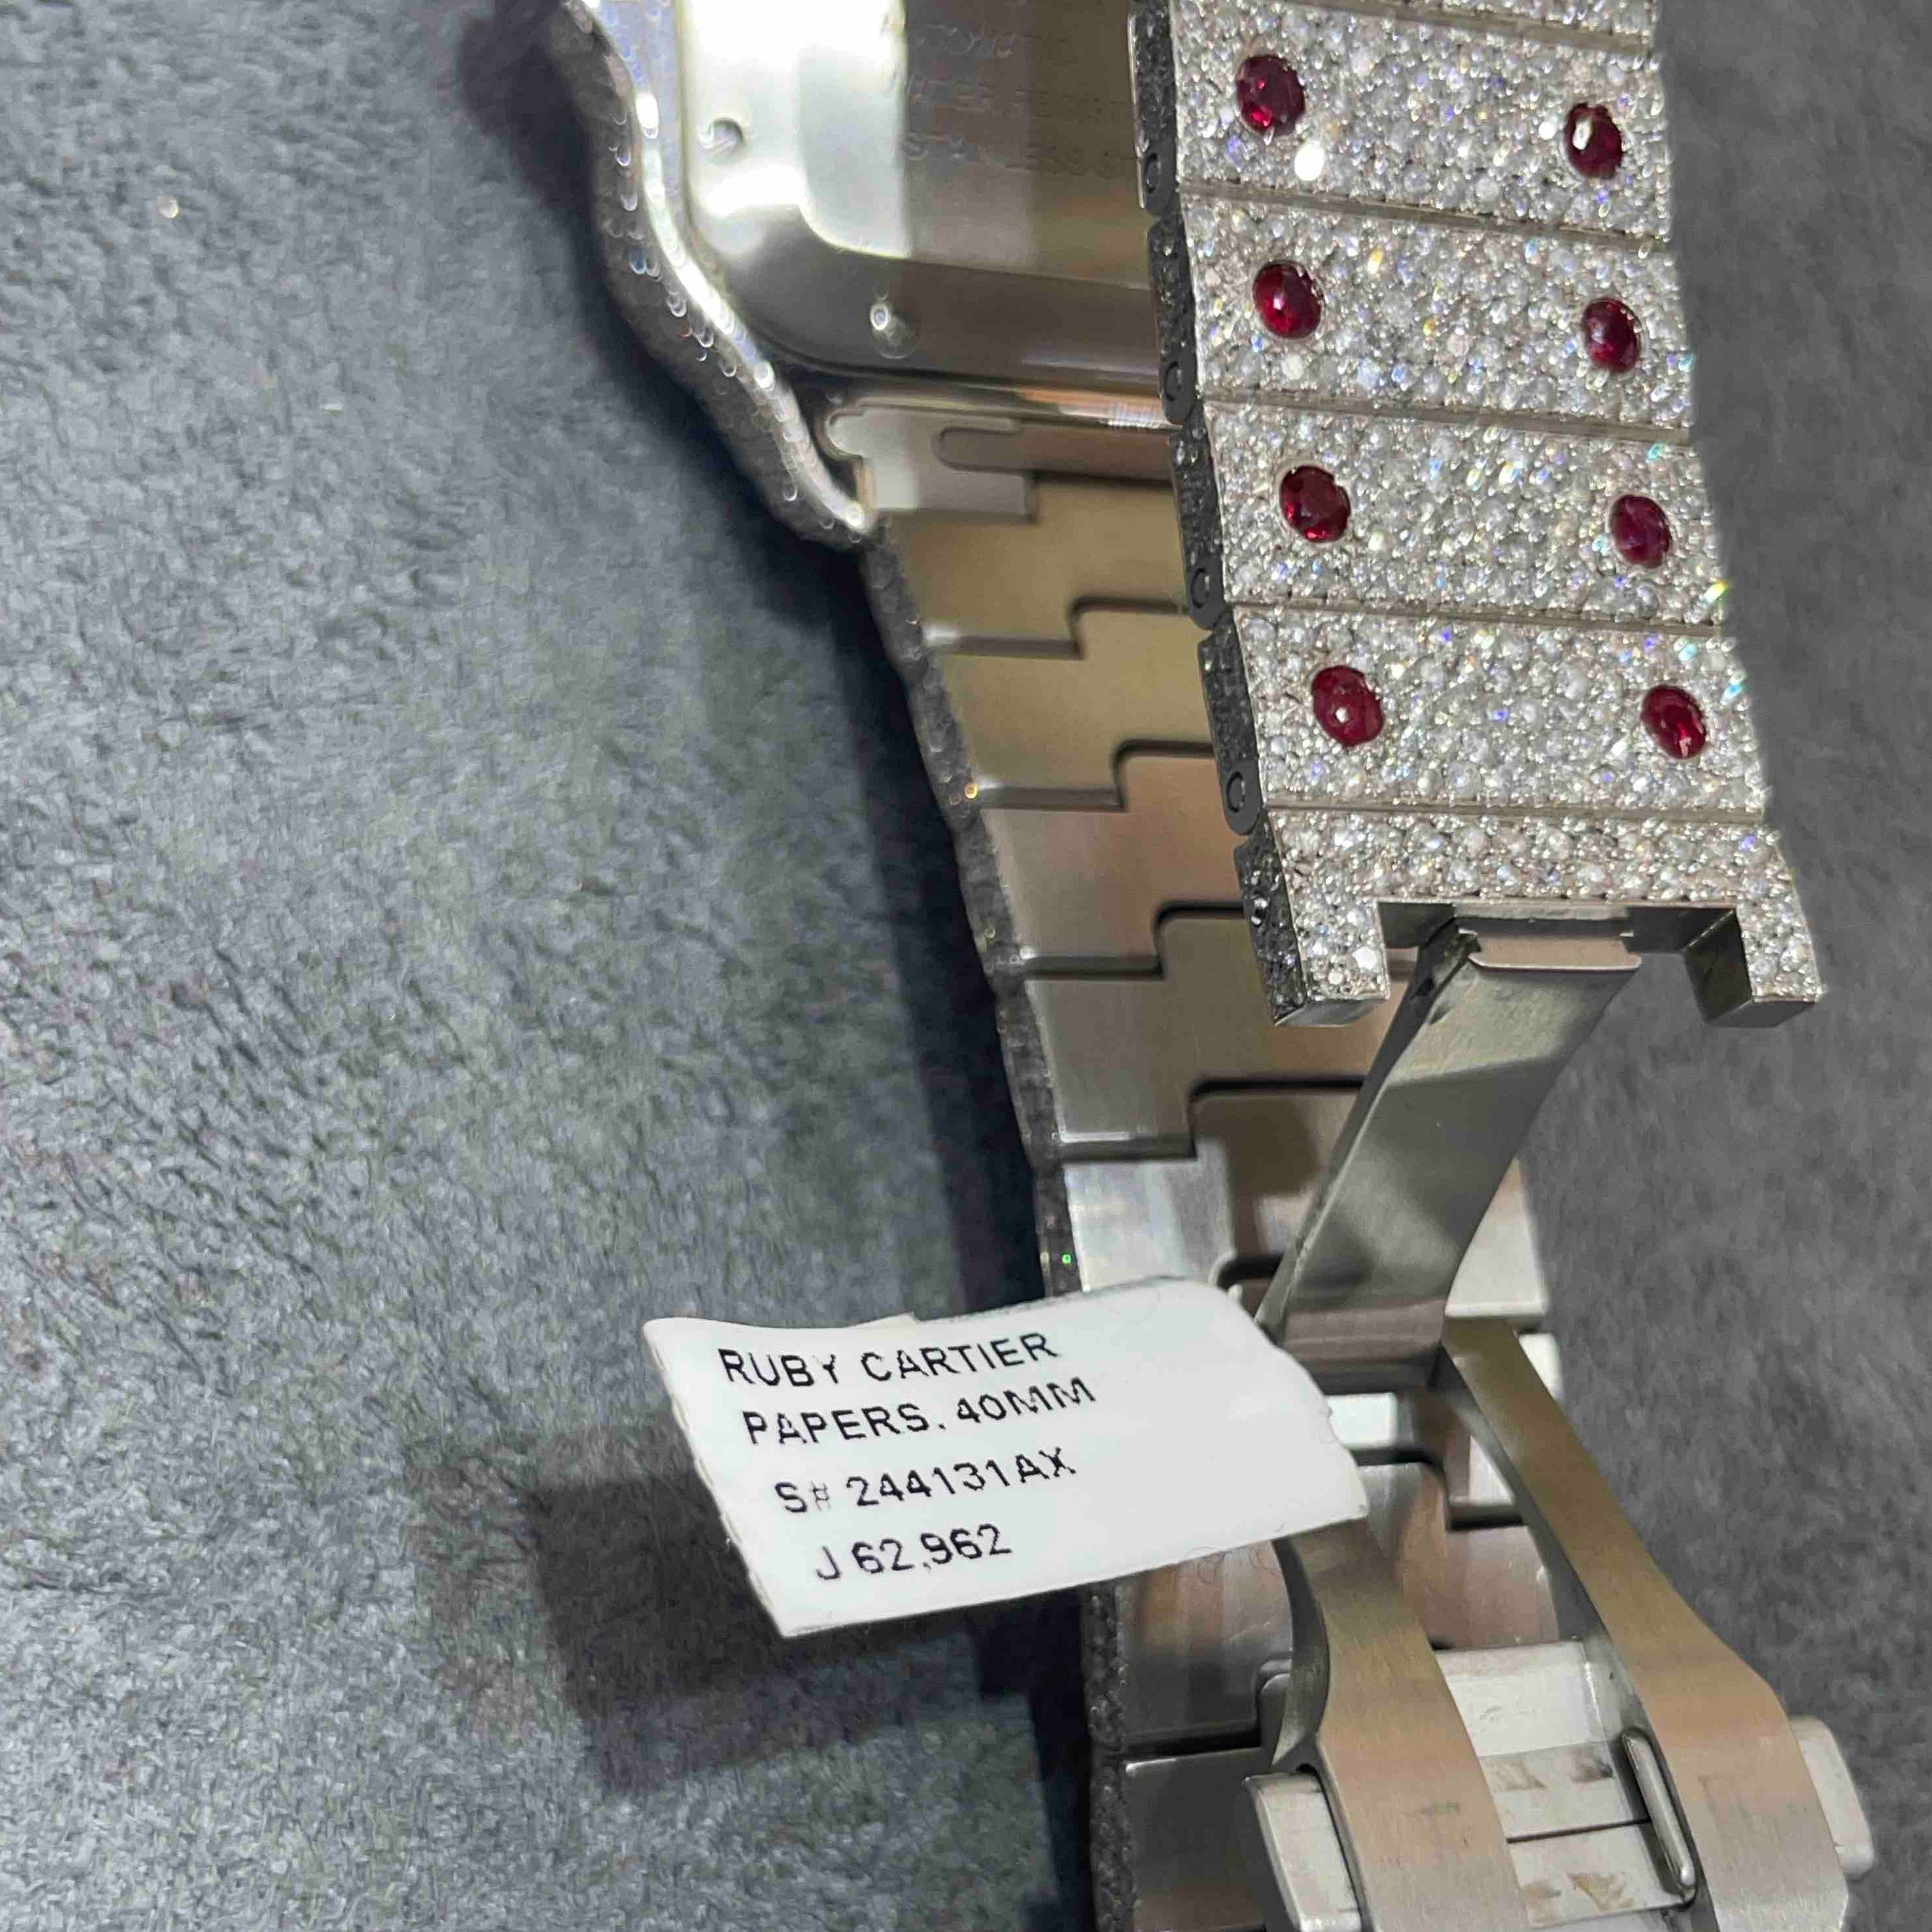 41mm RUBY ICED OUT CARTIER WATCH | BRAND NEW | 18 cts